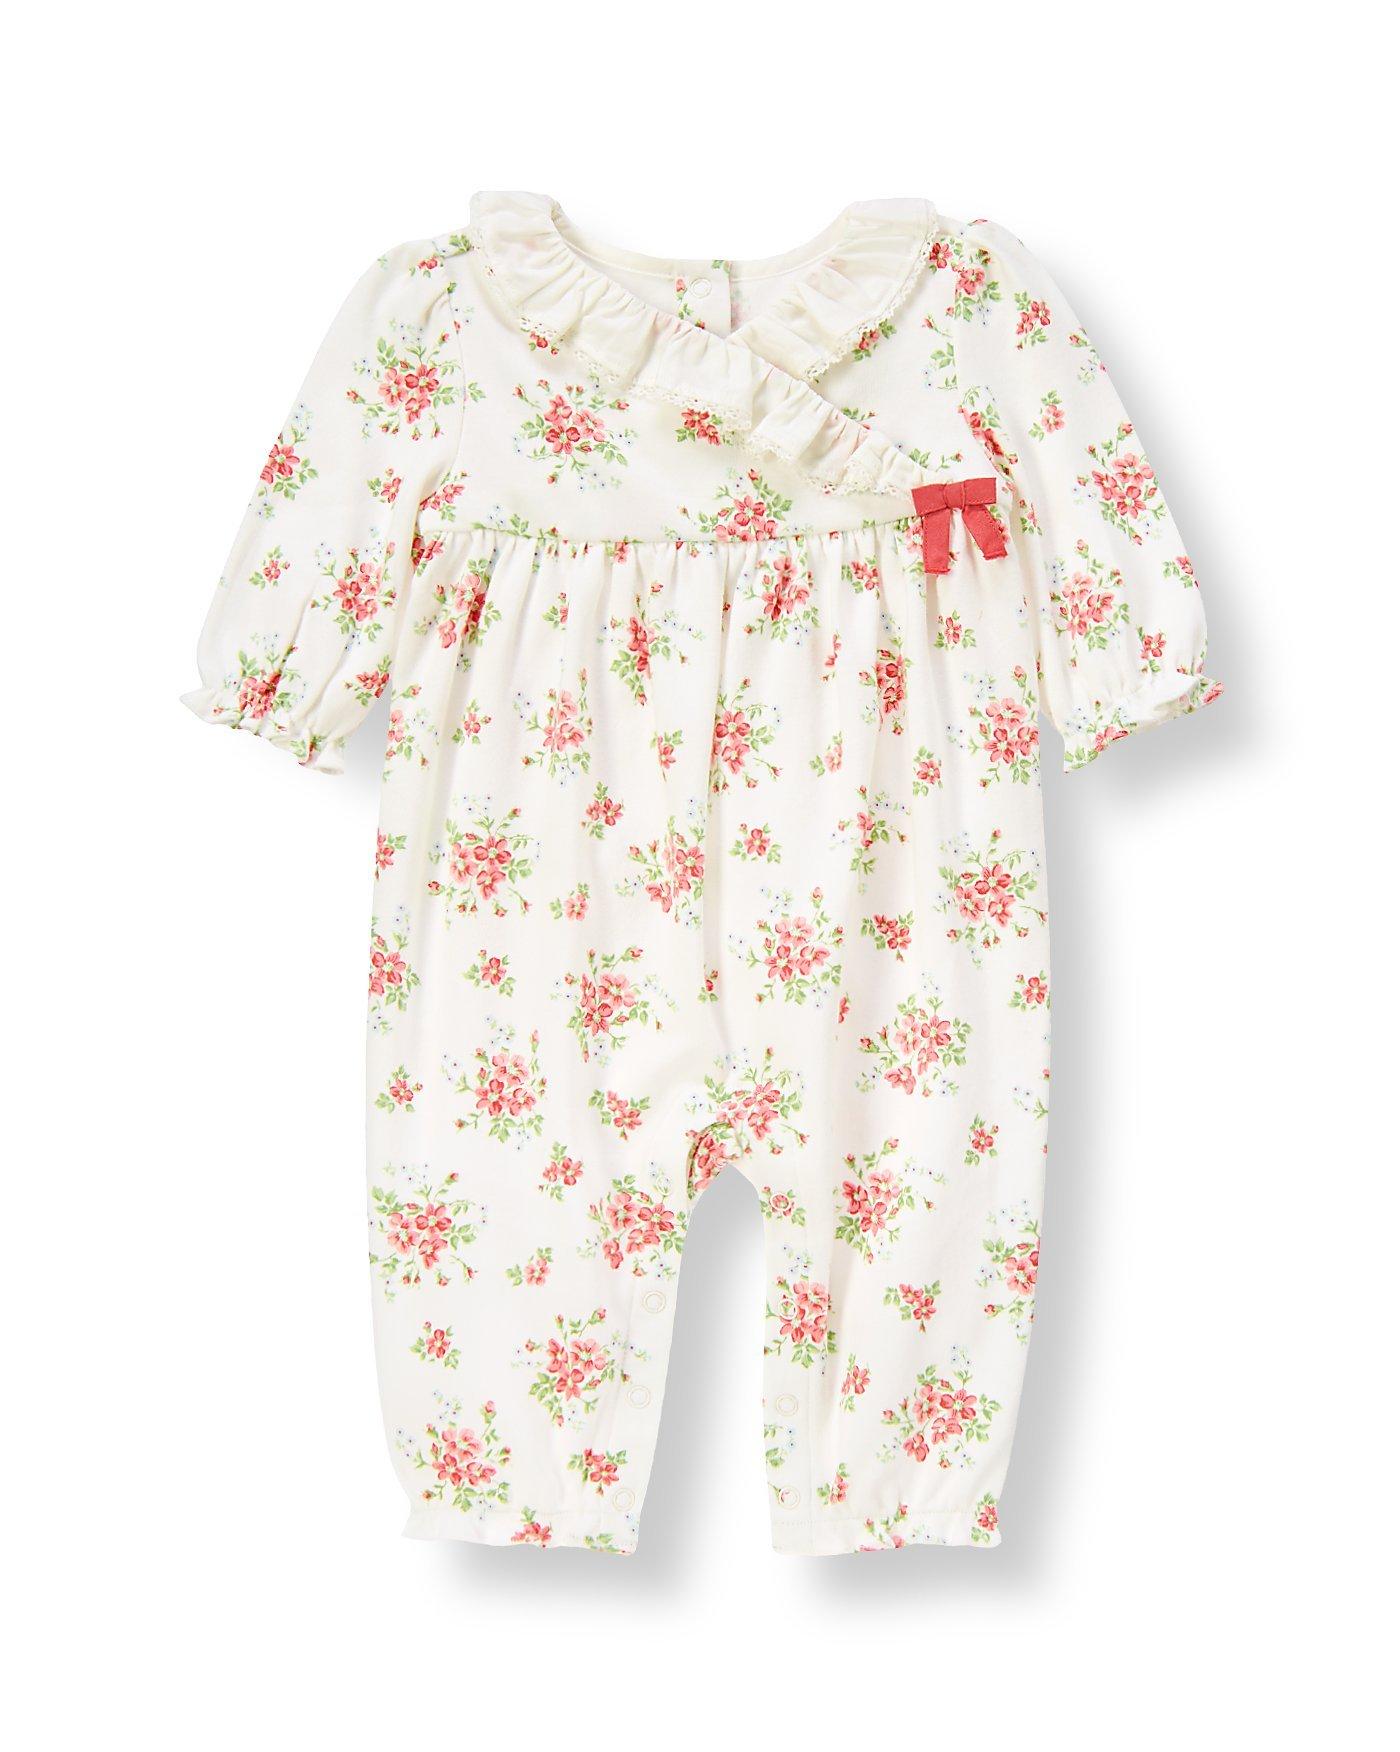 Baby Girl Berry Rose Floral Floral Kimono One-Piece at JanieandJack